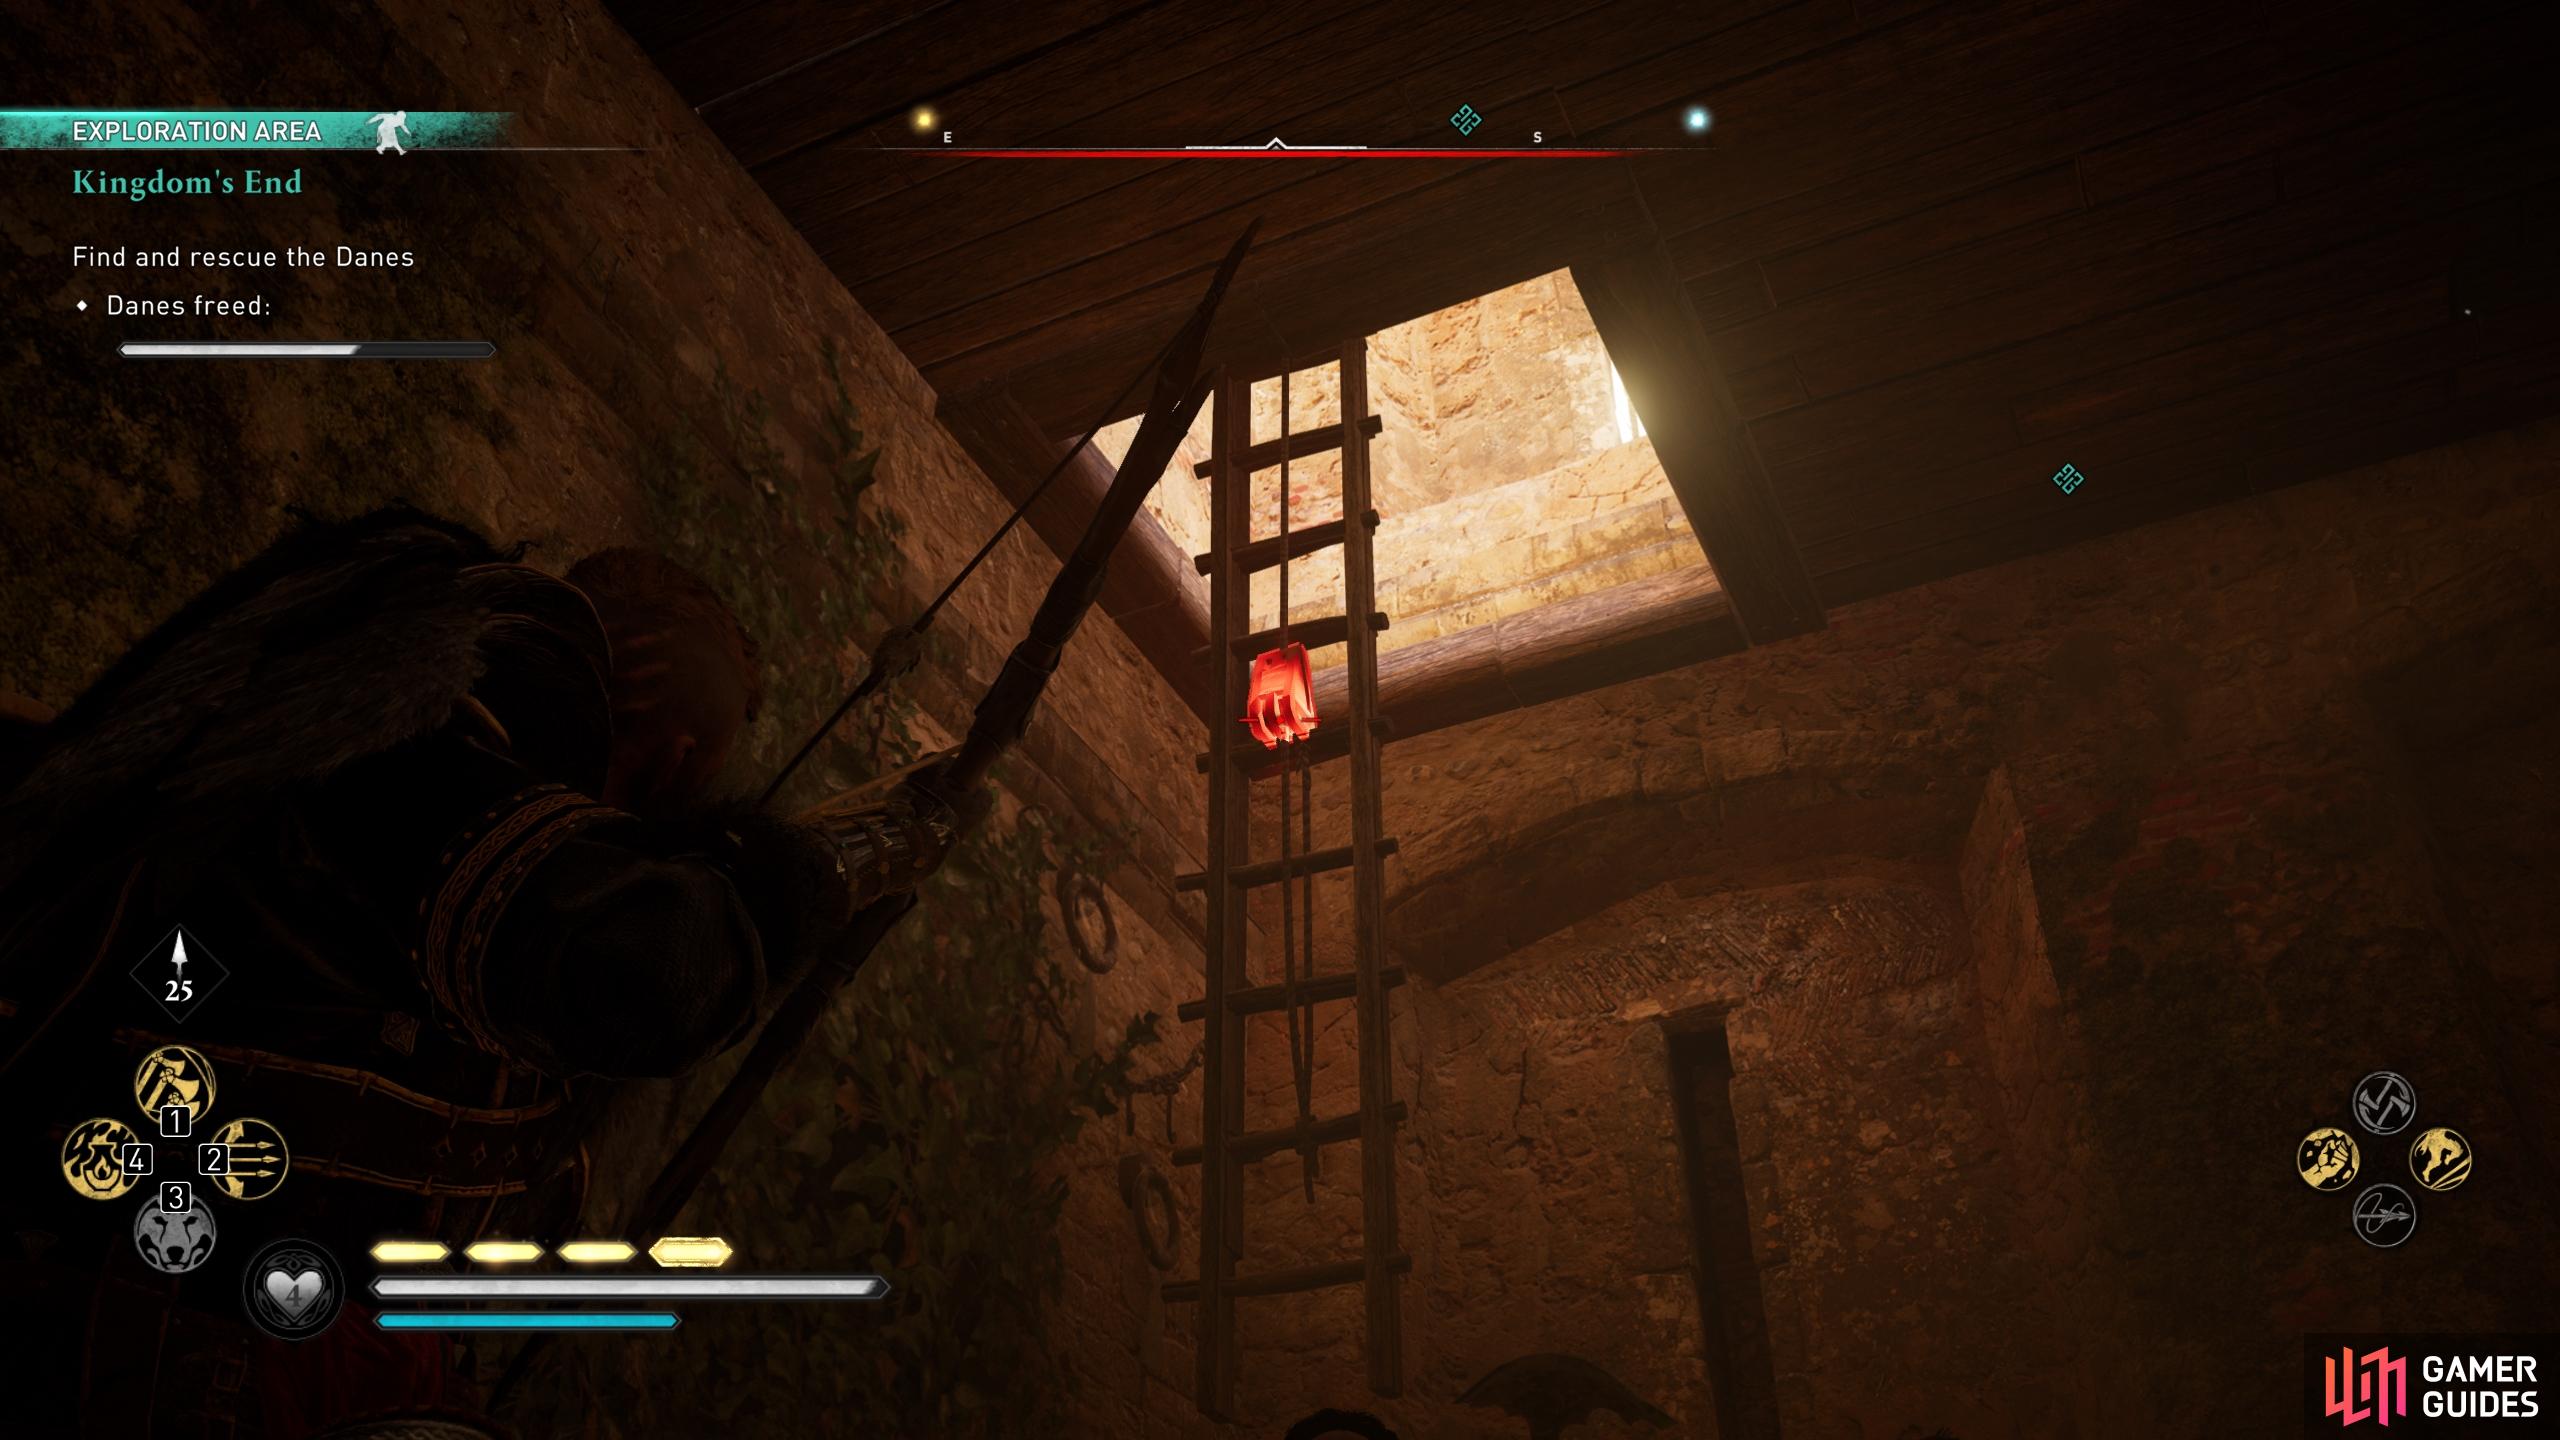 You'll need to shoot the ladder link beneath the tower to free the Danes.